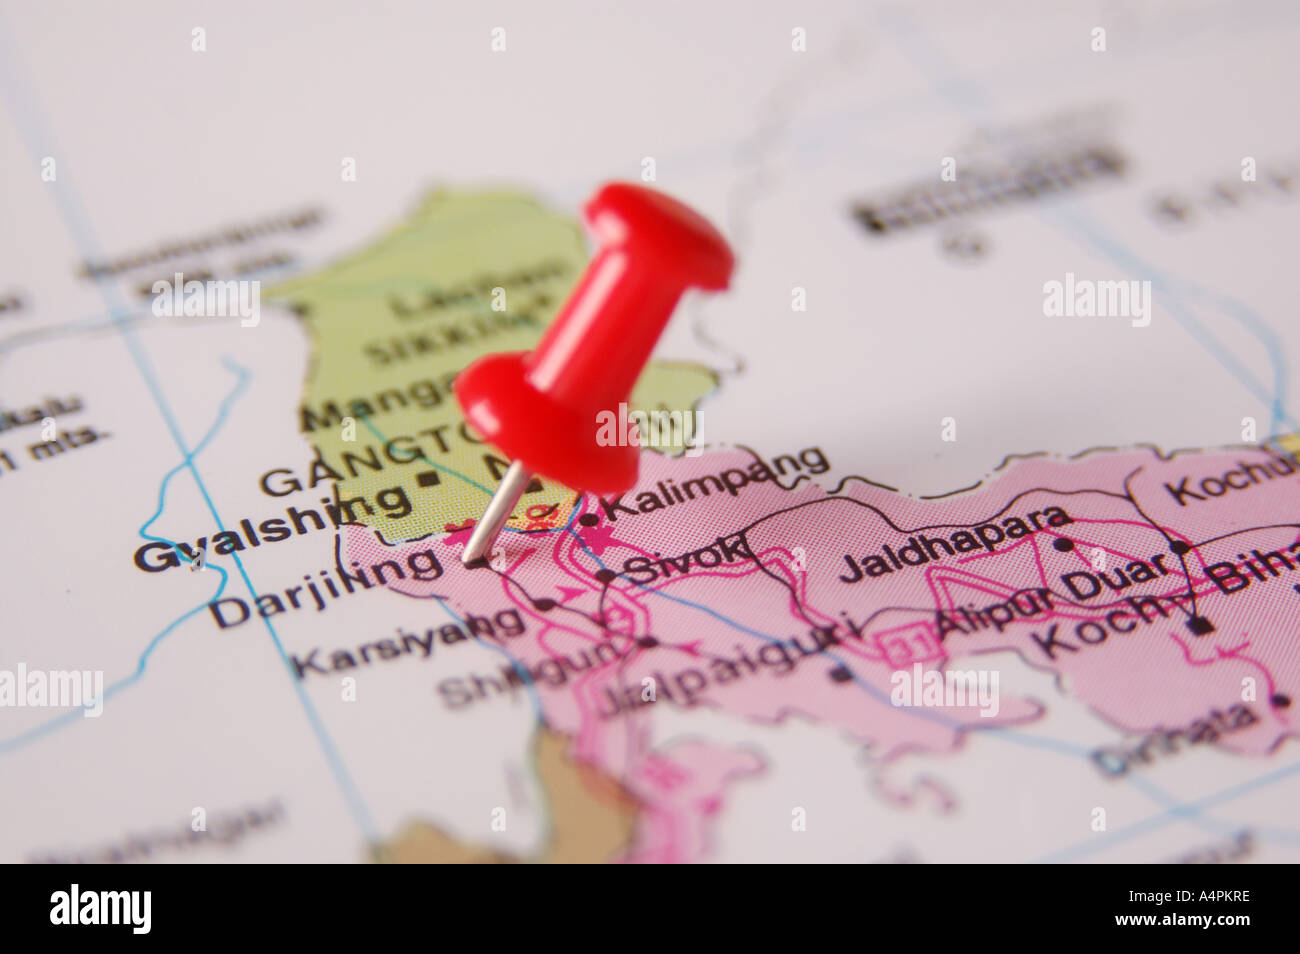 ang77834-map-of-india-spotted-darjeeling-by-red-colored-board-pin-stock